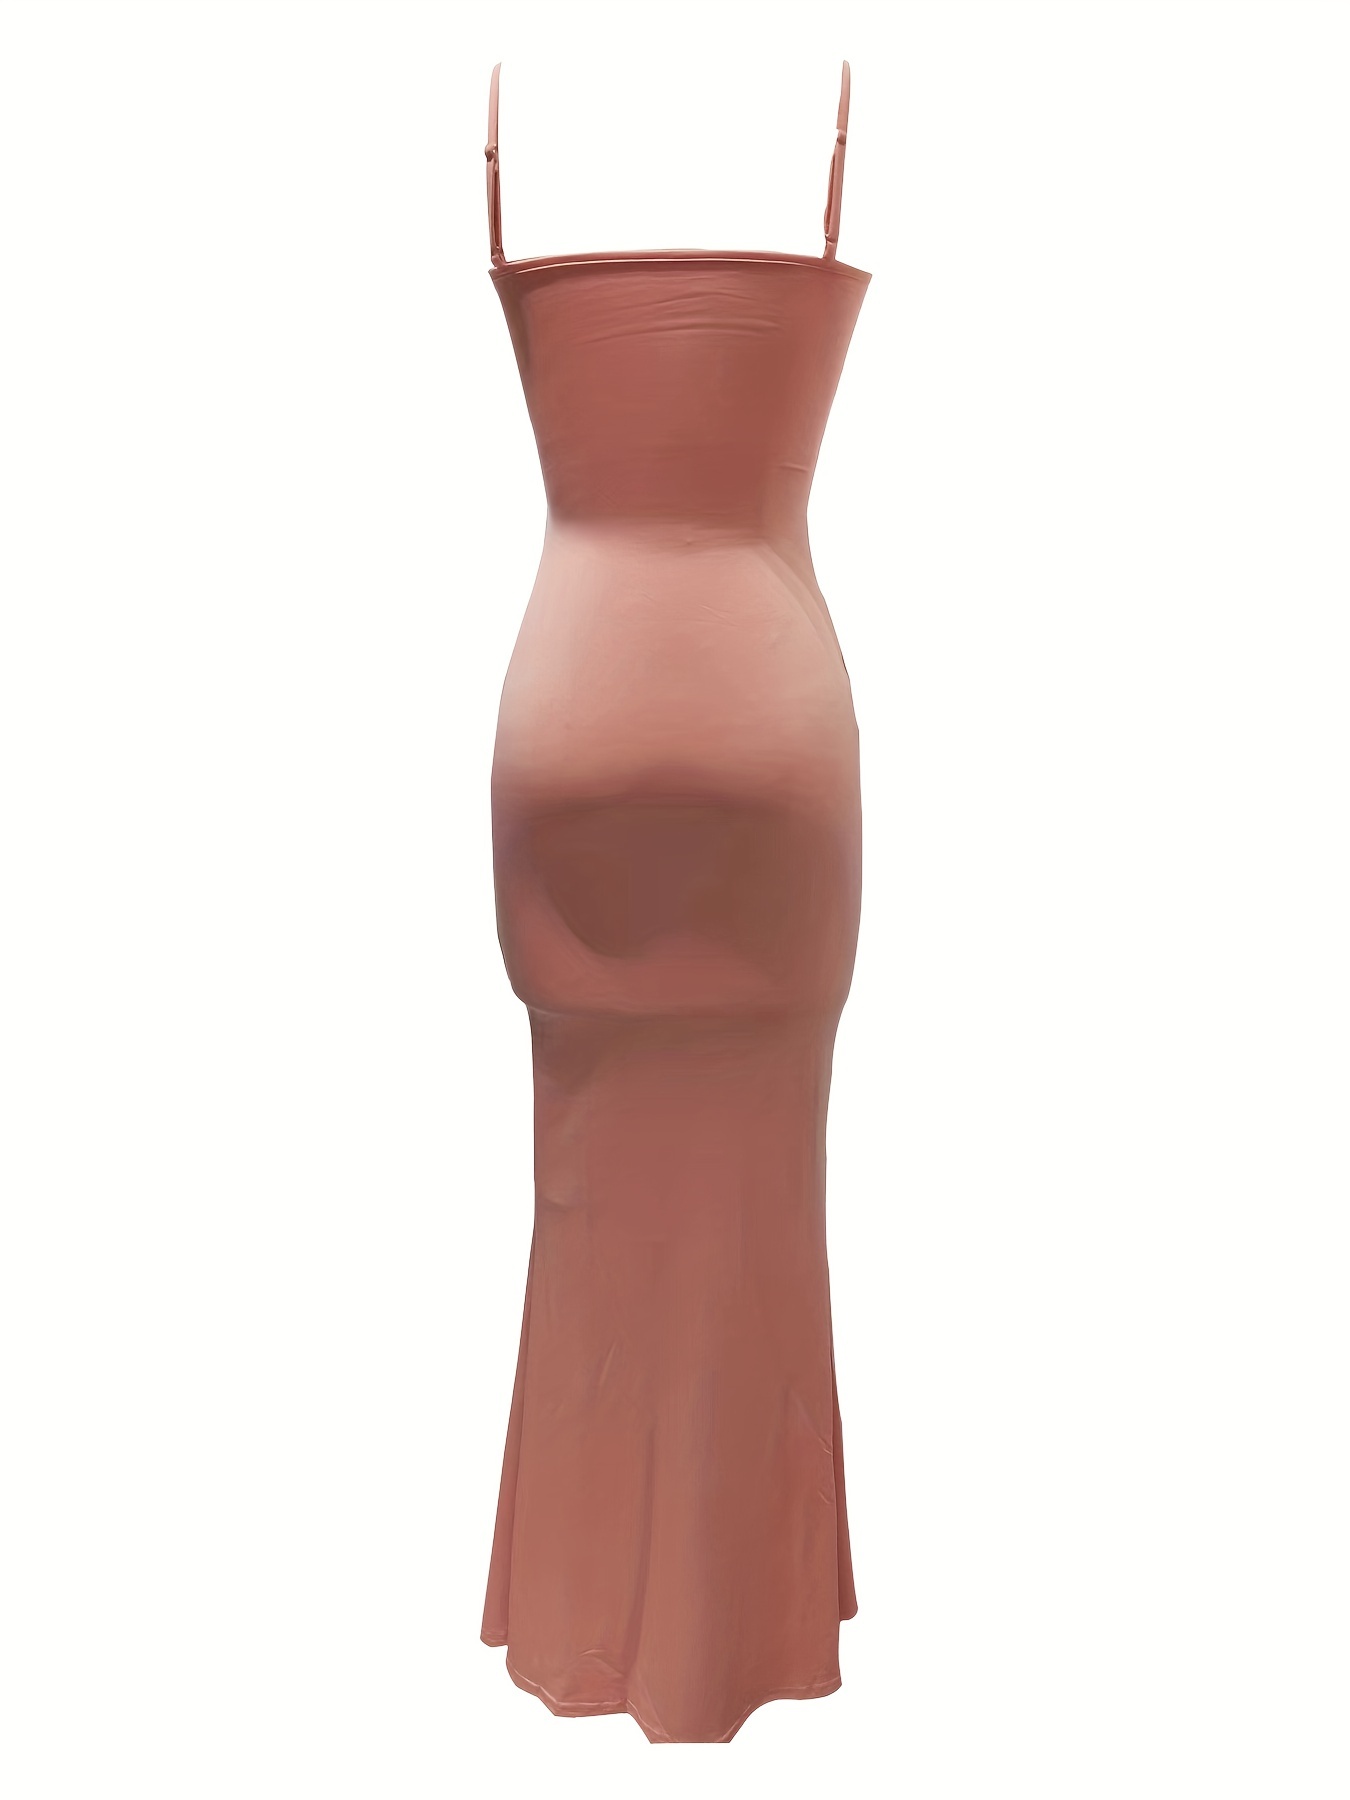 Summer Bodycon Strapless Maxi Dress Casual For Women Elegant Peach Hip,  Backless Design, Perfect For Casual, Evening, Party, And Club Wear From  Hu02, $12.24